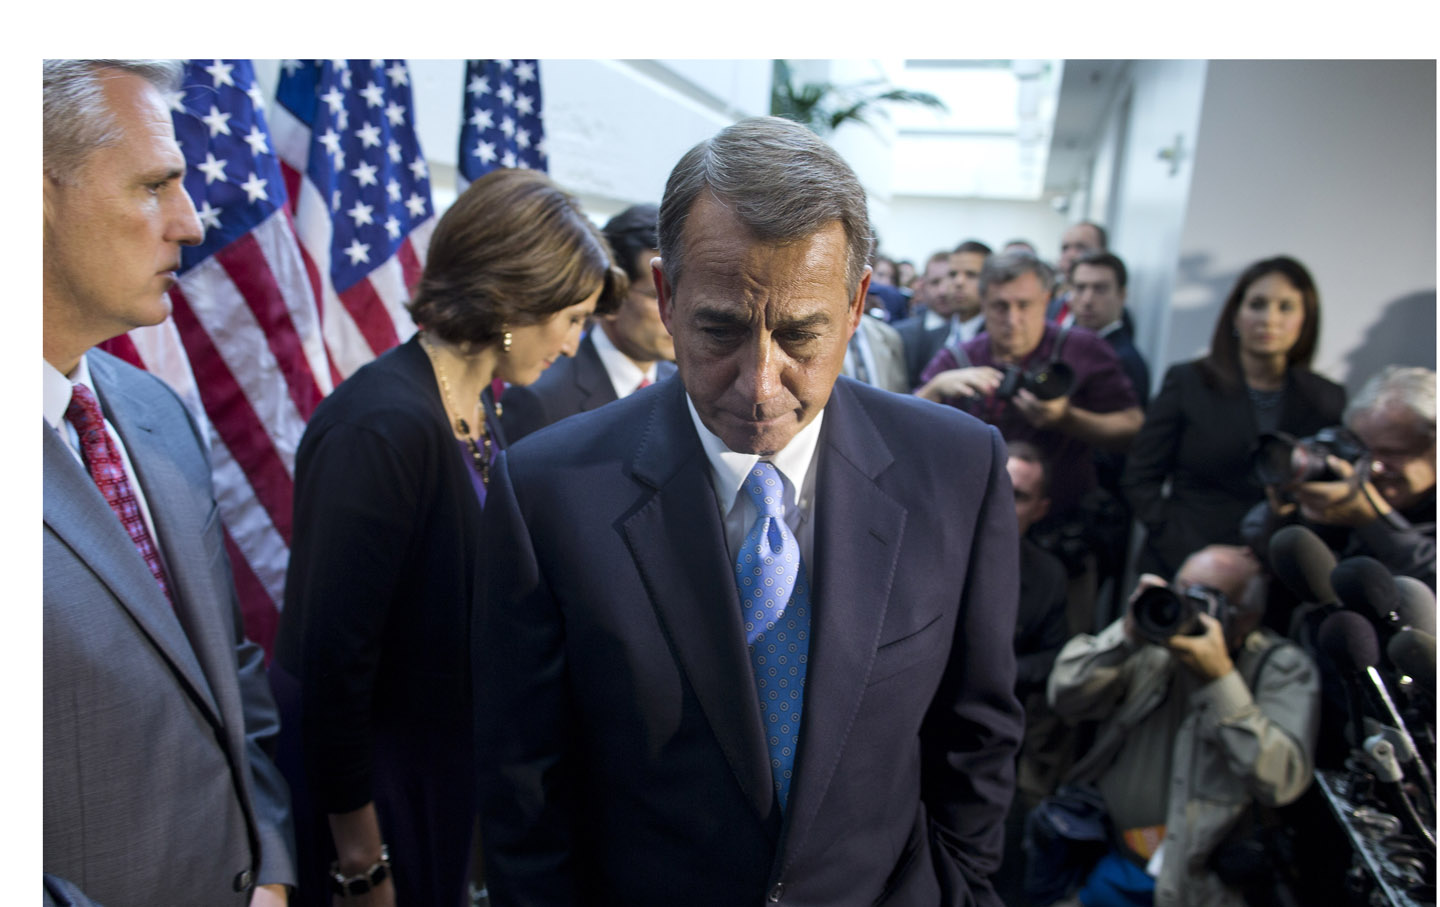 John Boehner’s Downfall Had Nothing to Do With His Position on Abortion